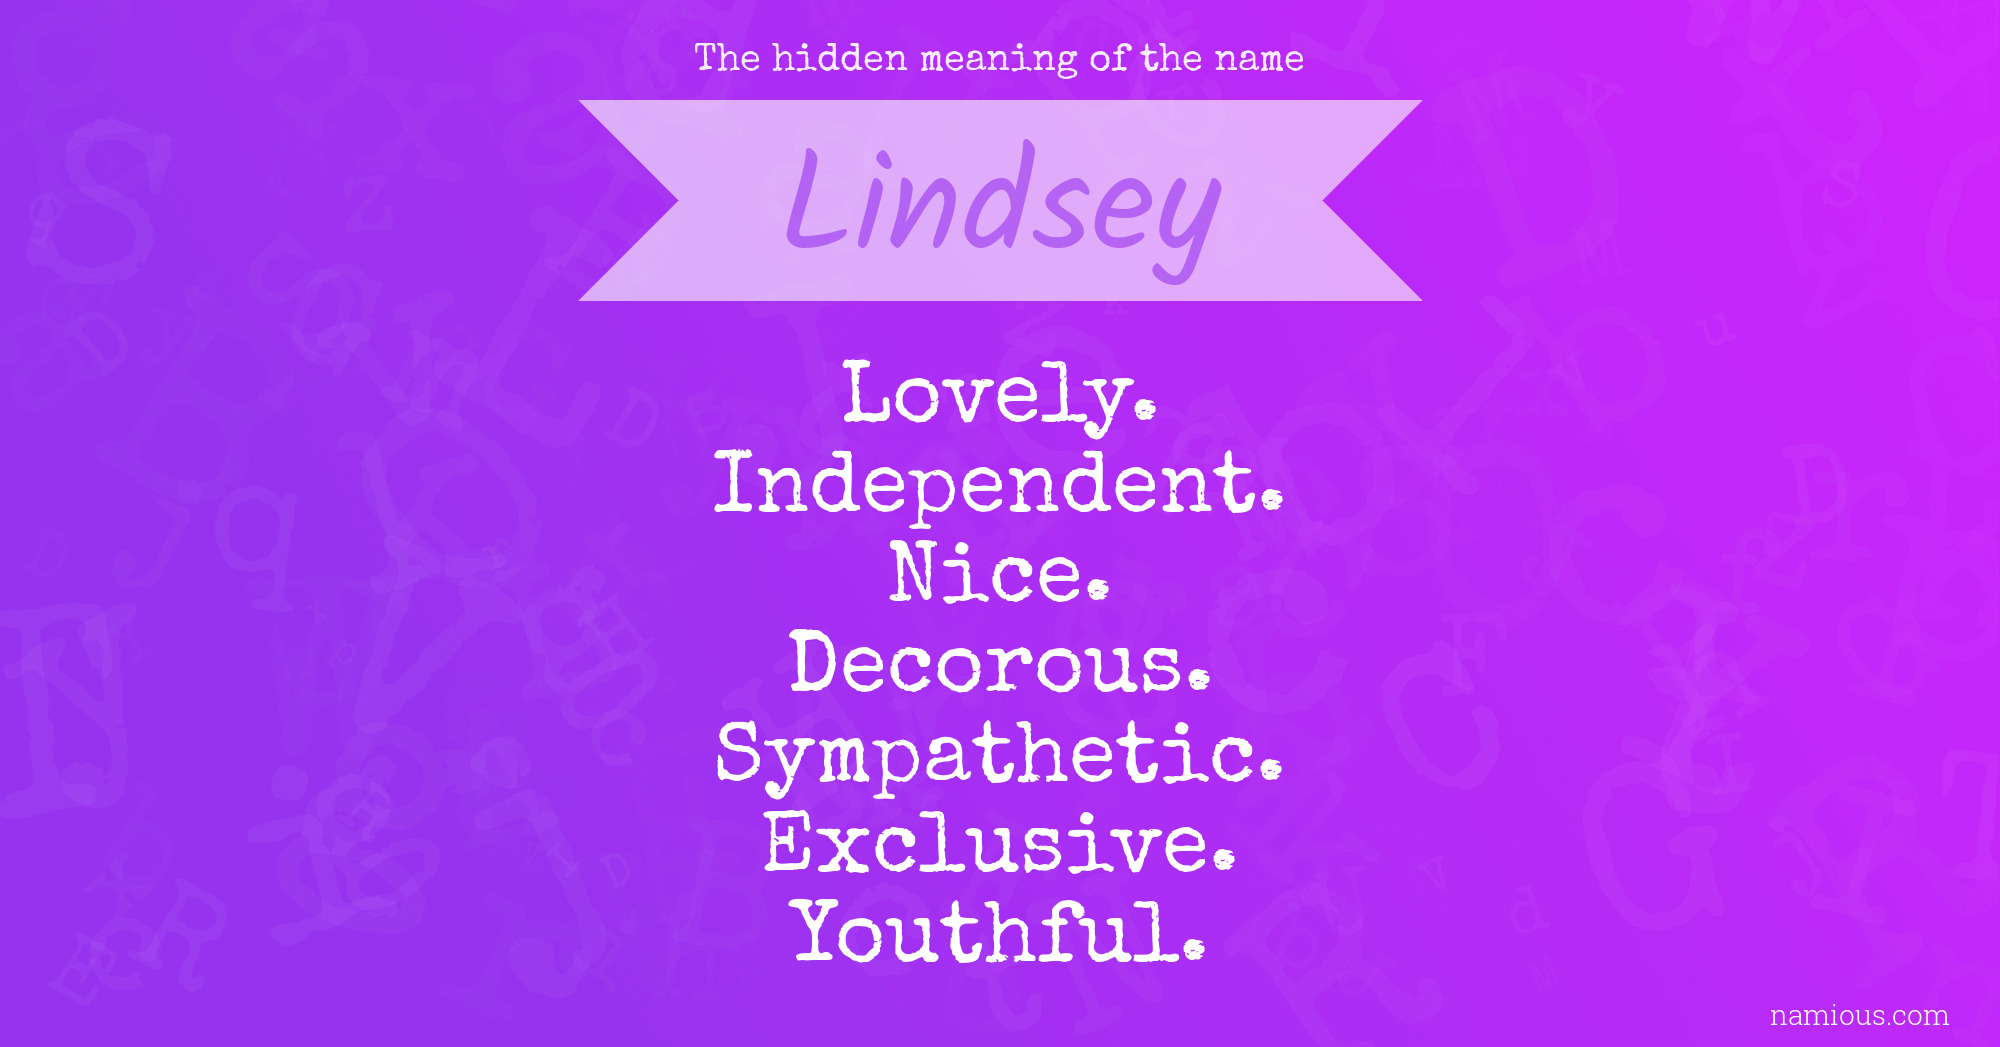 The hidden meaning of the name Lindsey